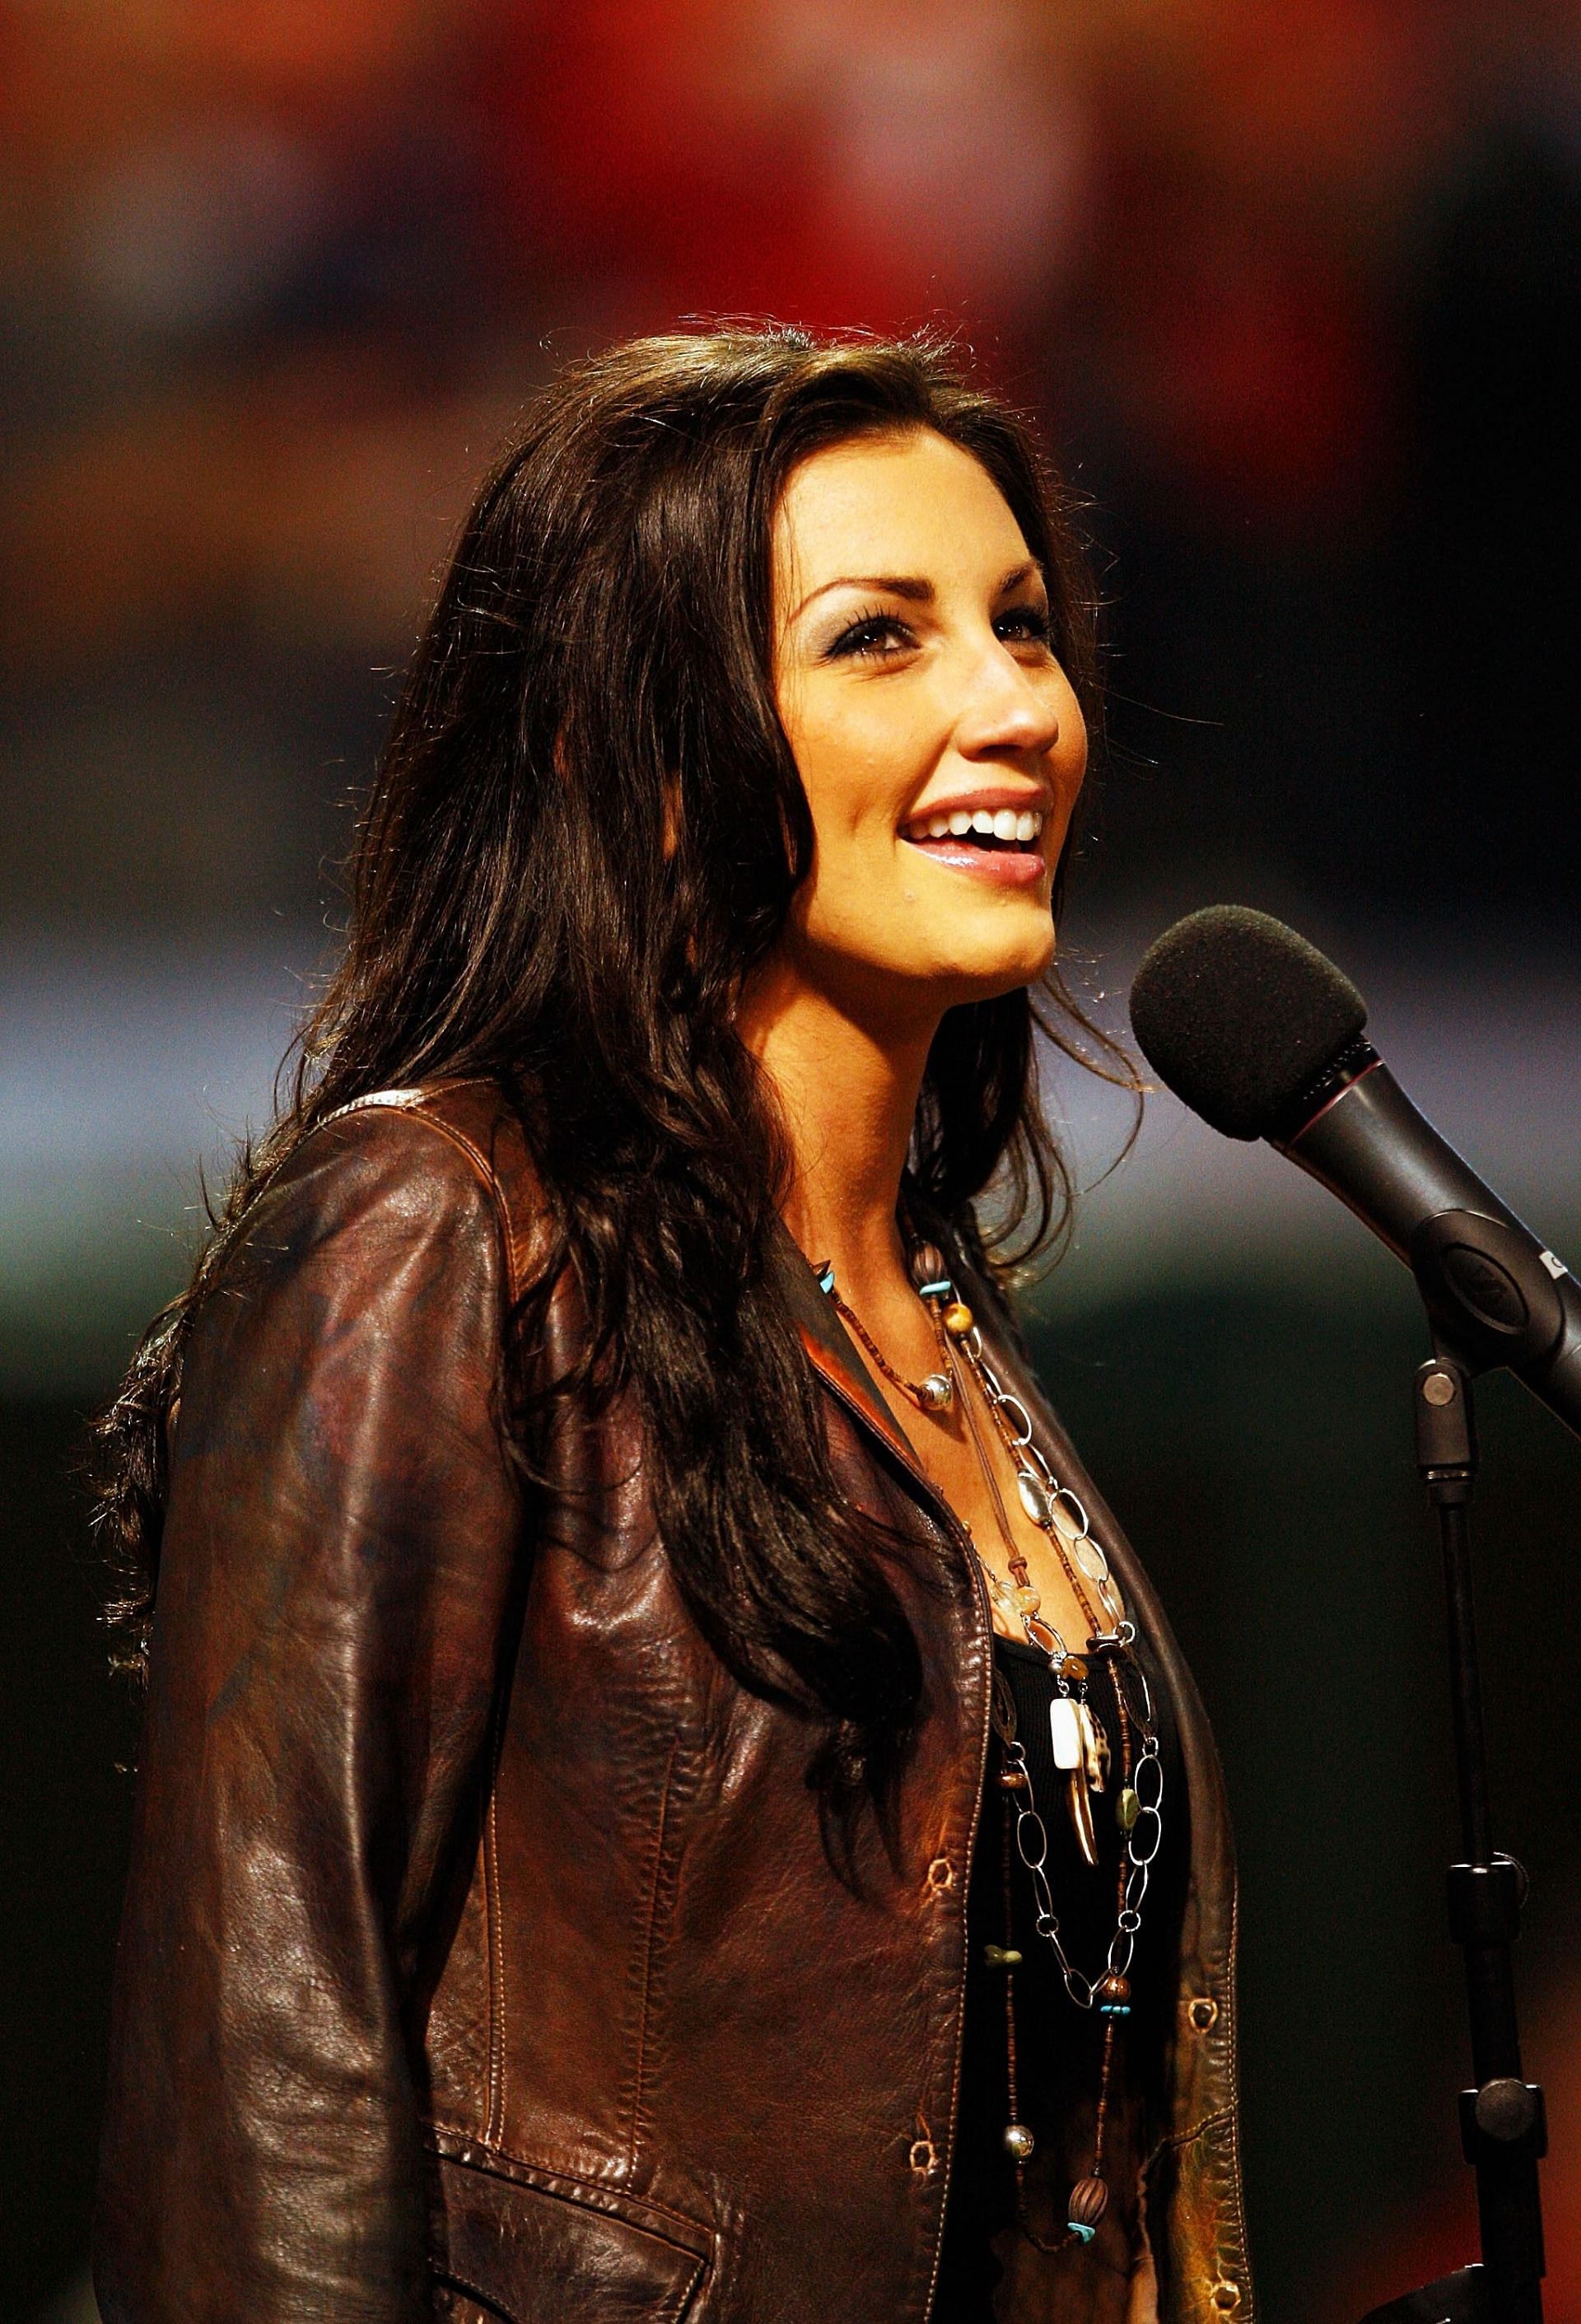 ALCS: Boston Red Sox v Cleveland Indians - Game 5: CLEVELAND - OCTOBER 18: Country music artist Danielle Peck performs the National Anthem before Game Five of the American League Championship Series between the Cleveland Indians and the Boston Red Sox at Jacobs Field on October 18, 2007, in Cleveland, Ohio. (Photo by Pool/Getty Images)